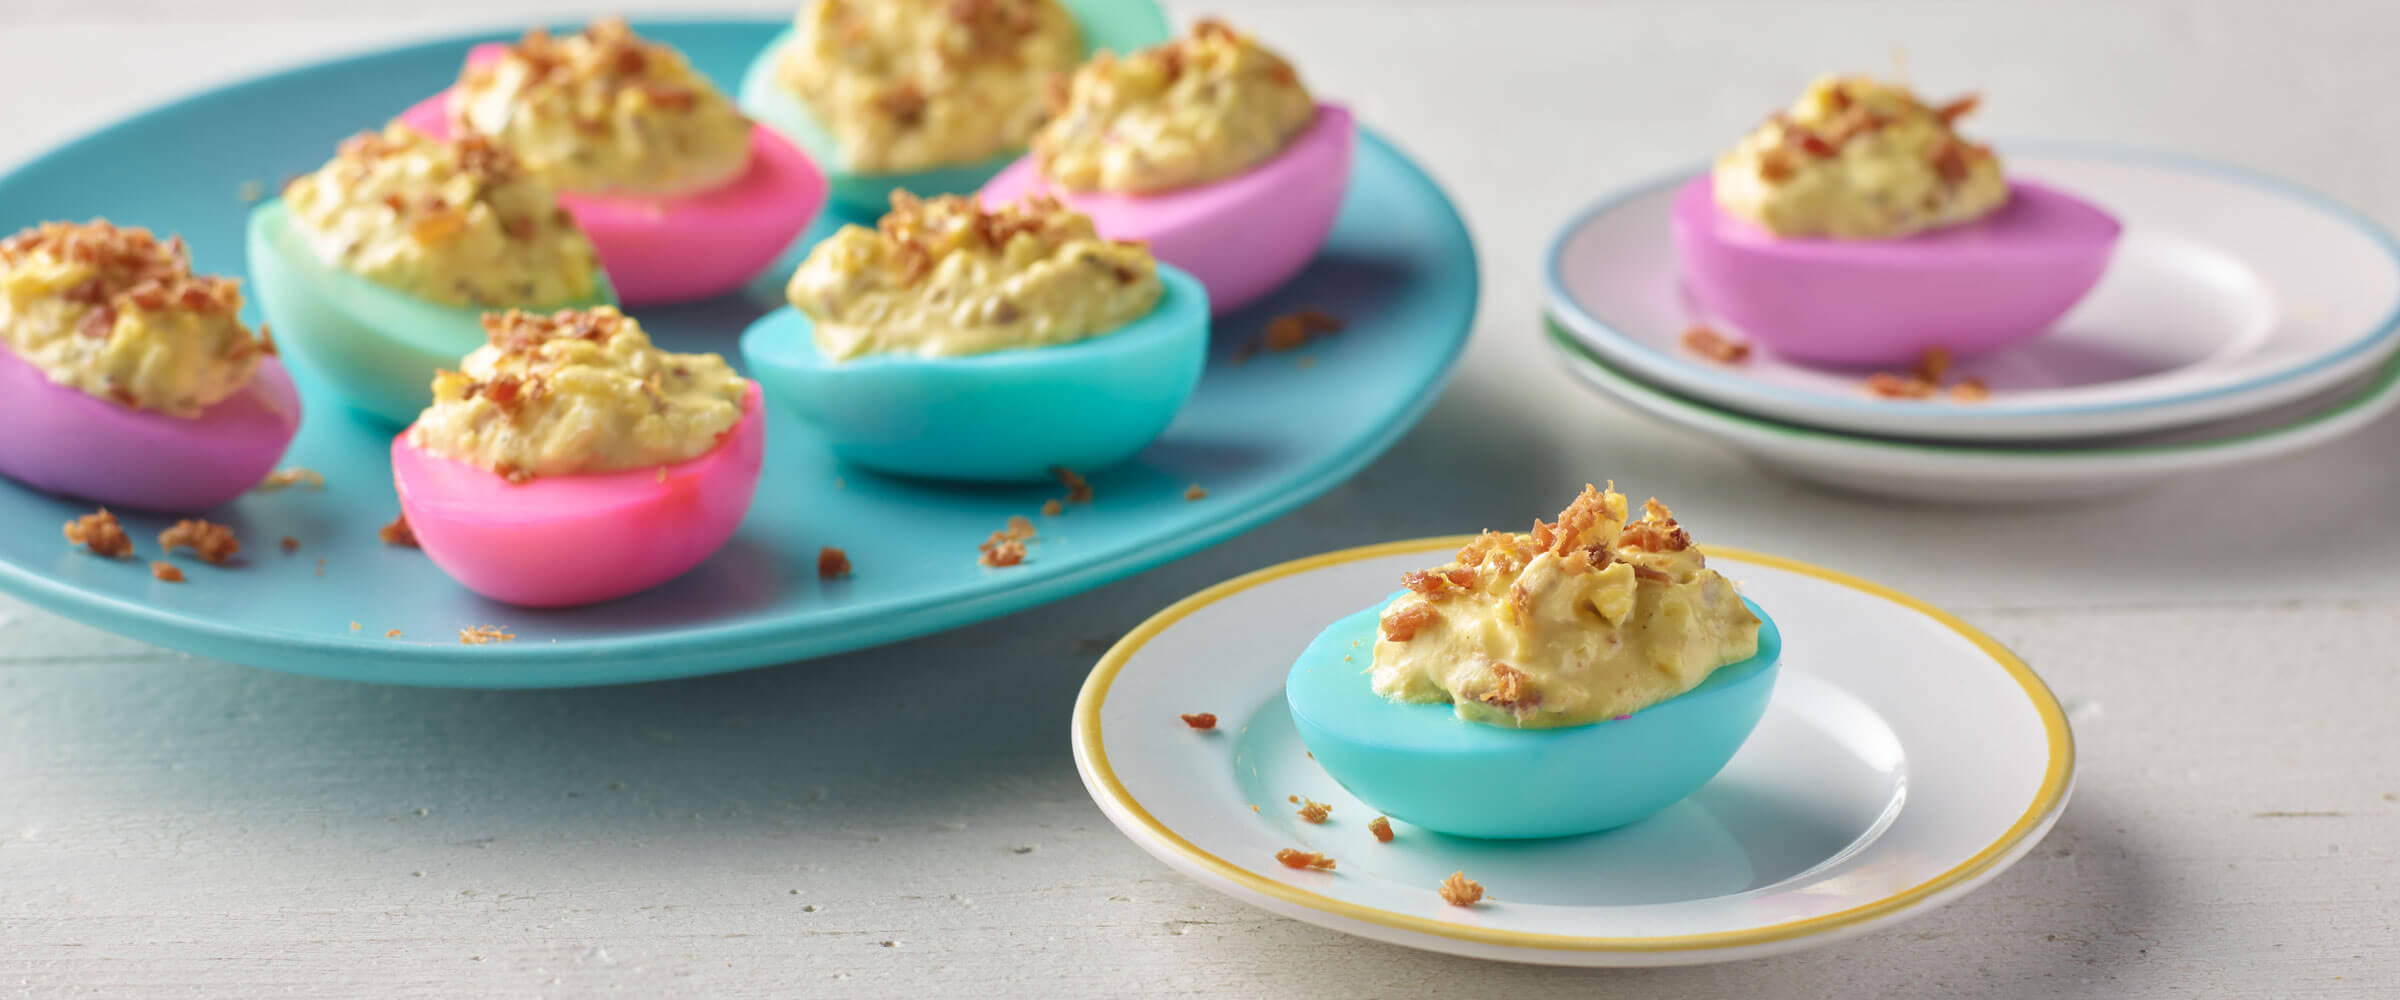 Spring Deviled Eggs dyed pink, blue and purple topped with bacon bits